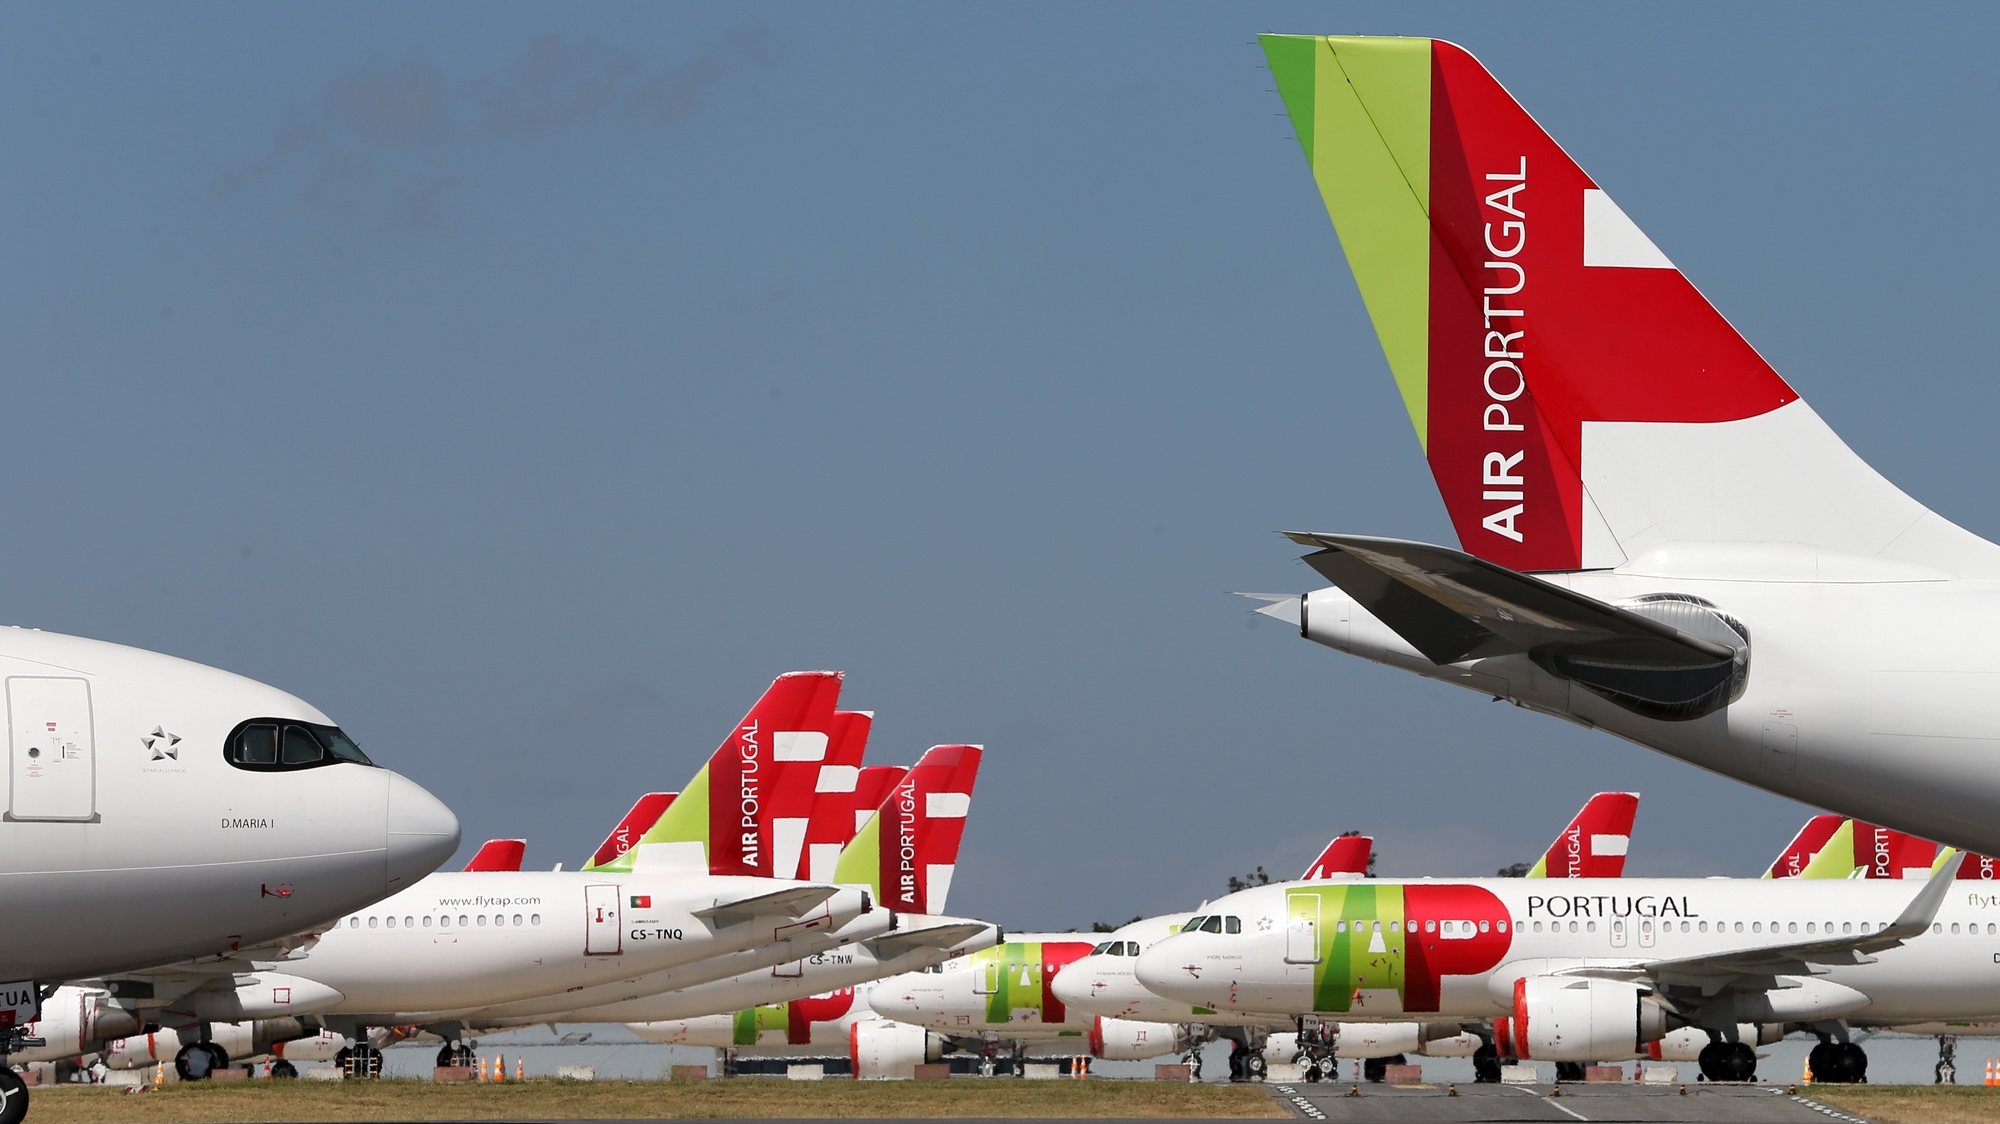 epa08524023 A TAP Air Portugal aircraft grounded at Humberto Delgado airport closed for passenger traffic as part of the exceptional traffic measures to combat the epidemiological situation of Covid-19, in Lisbon, Portugal, 09 April 2020 (reissued 02 July 2020). The granting of state support to TAP has been under discussion since the airline&#039;s activity came to a standstill because of the coronavirus pandemic, with an agreed injection of up to 1,200 million euros.  EPA/MANUEL DE ALMEIDA